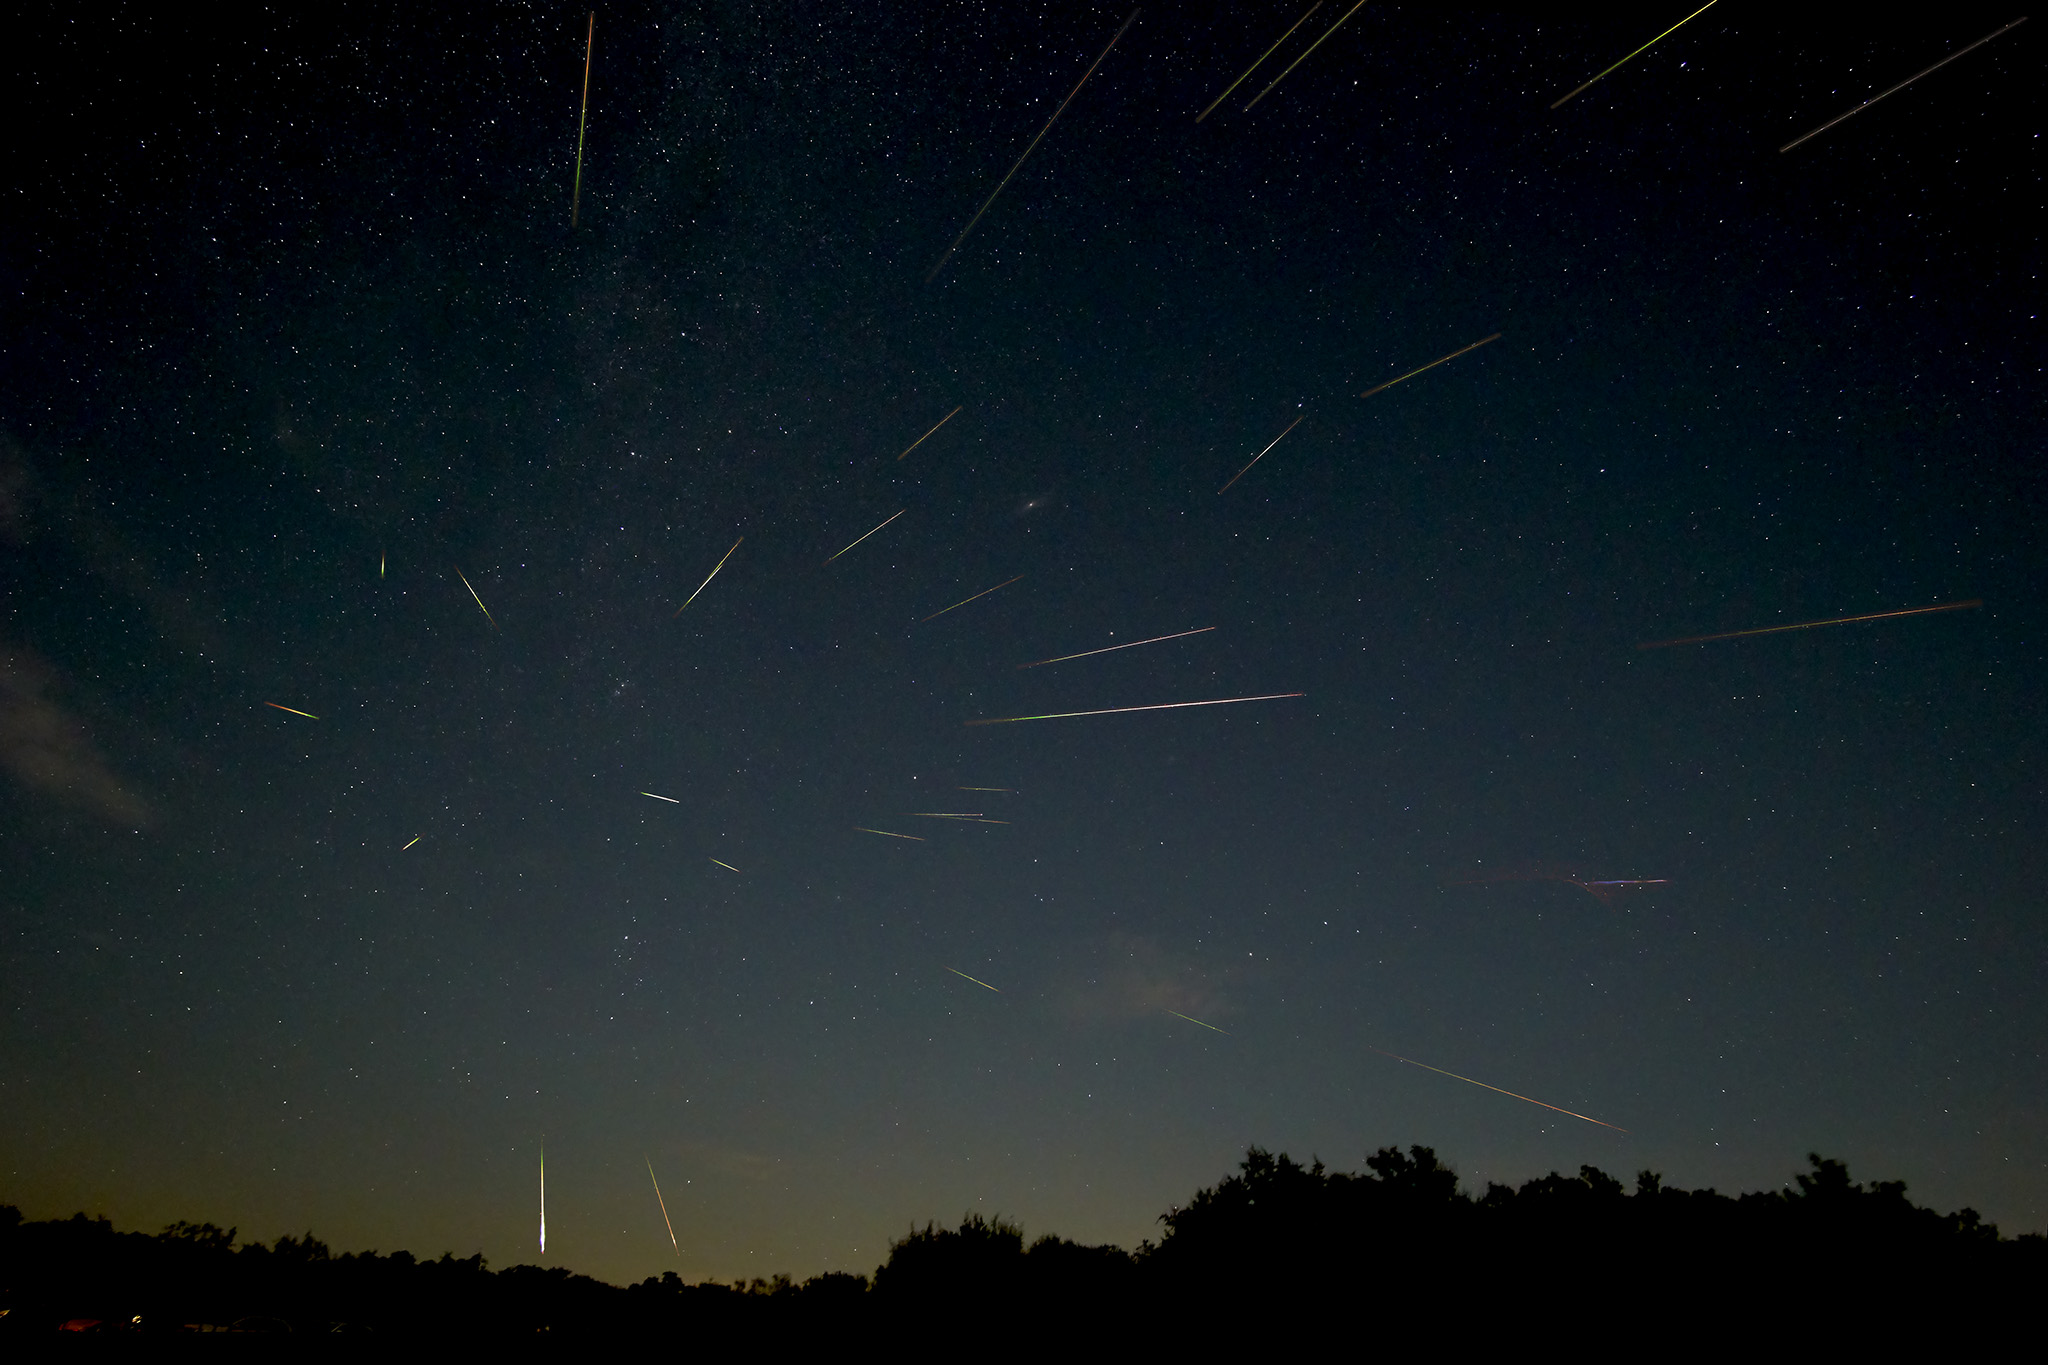 Perseid Meteor shower with the Andromeda Galaxy